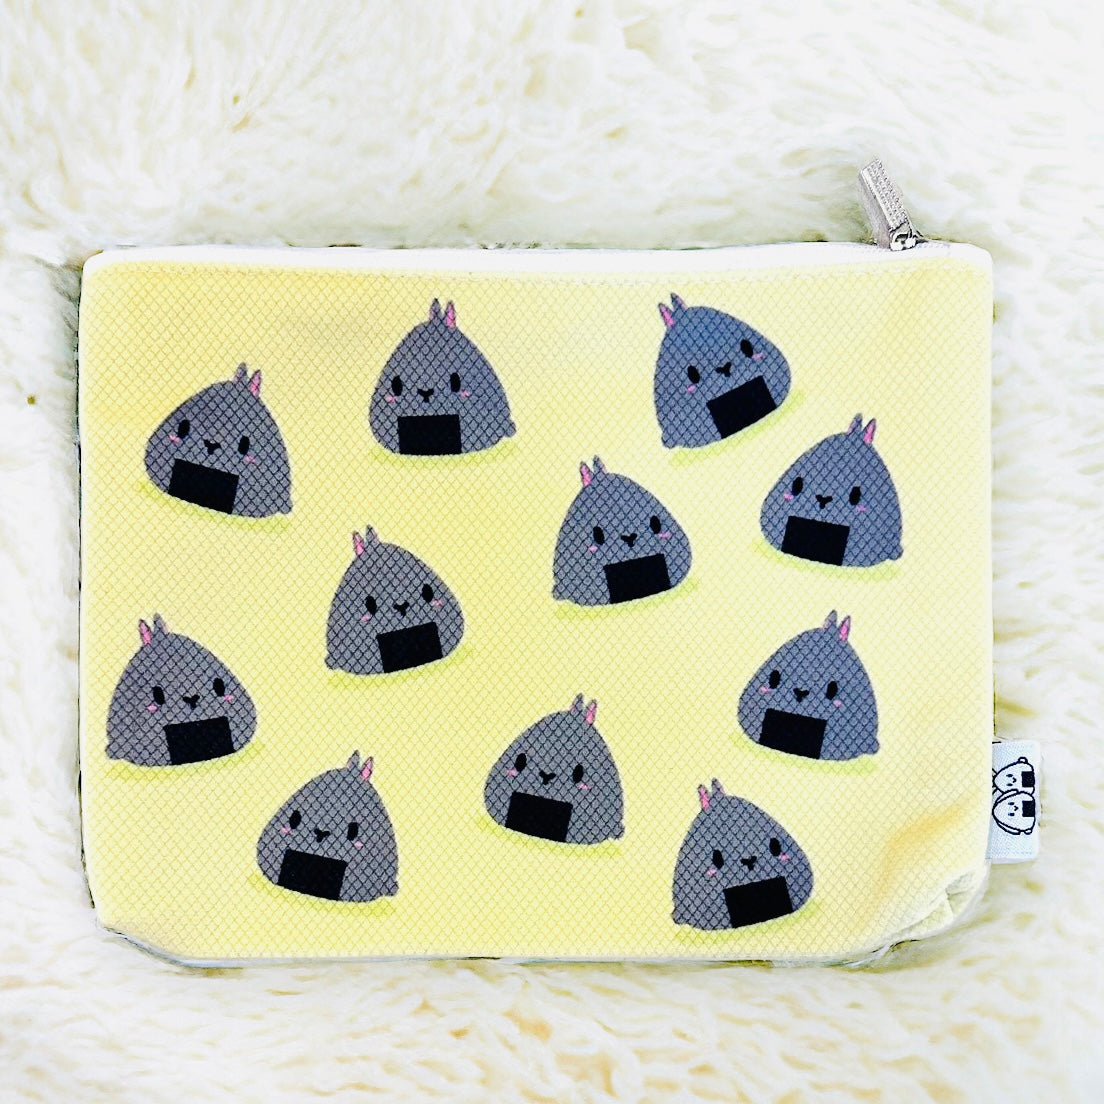 Onisaigi Small Pouch Set in Assorted Soft Hues Pastel Elegance